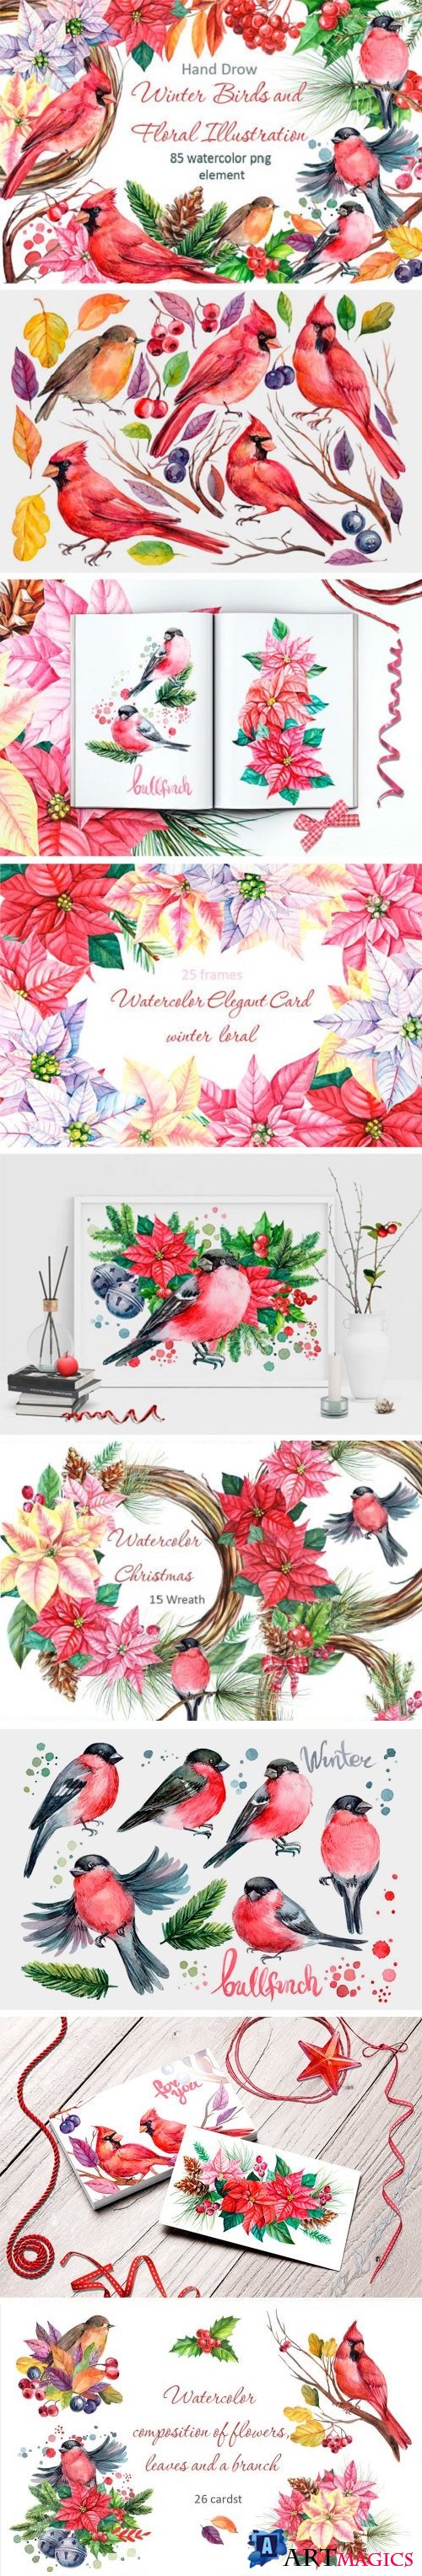 Winter Birds and Floral Illustration - 2010561